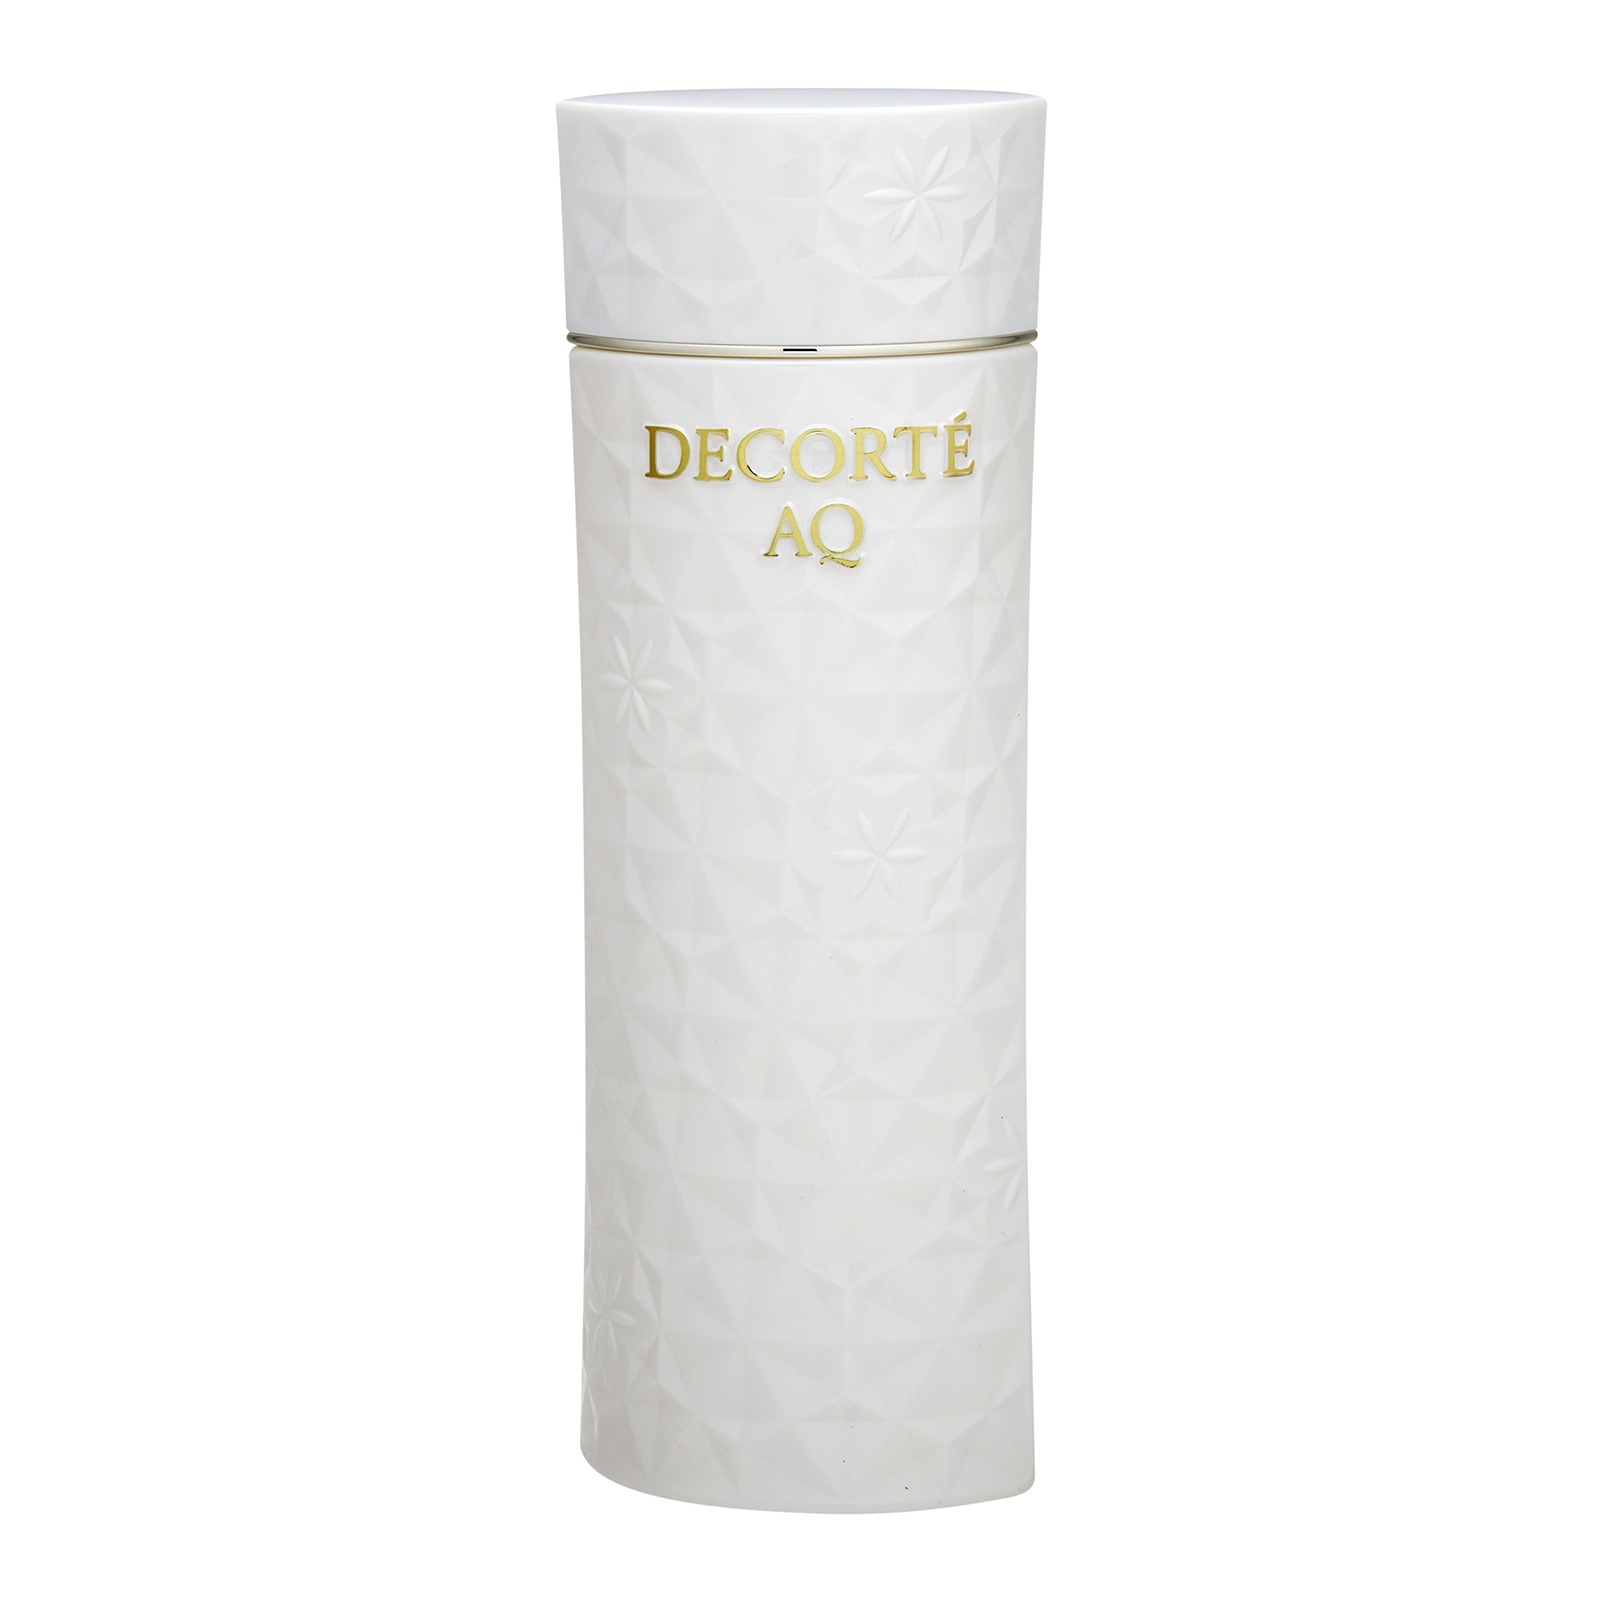 Cosme Decorte AQ Absolute Hydrating Lotion